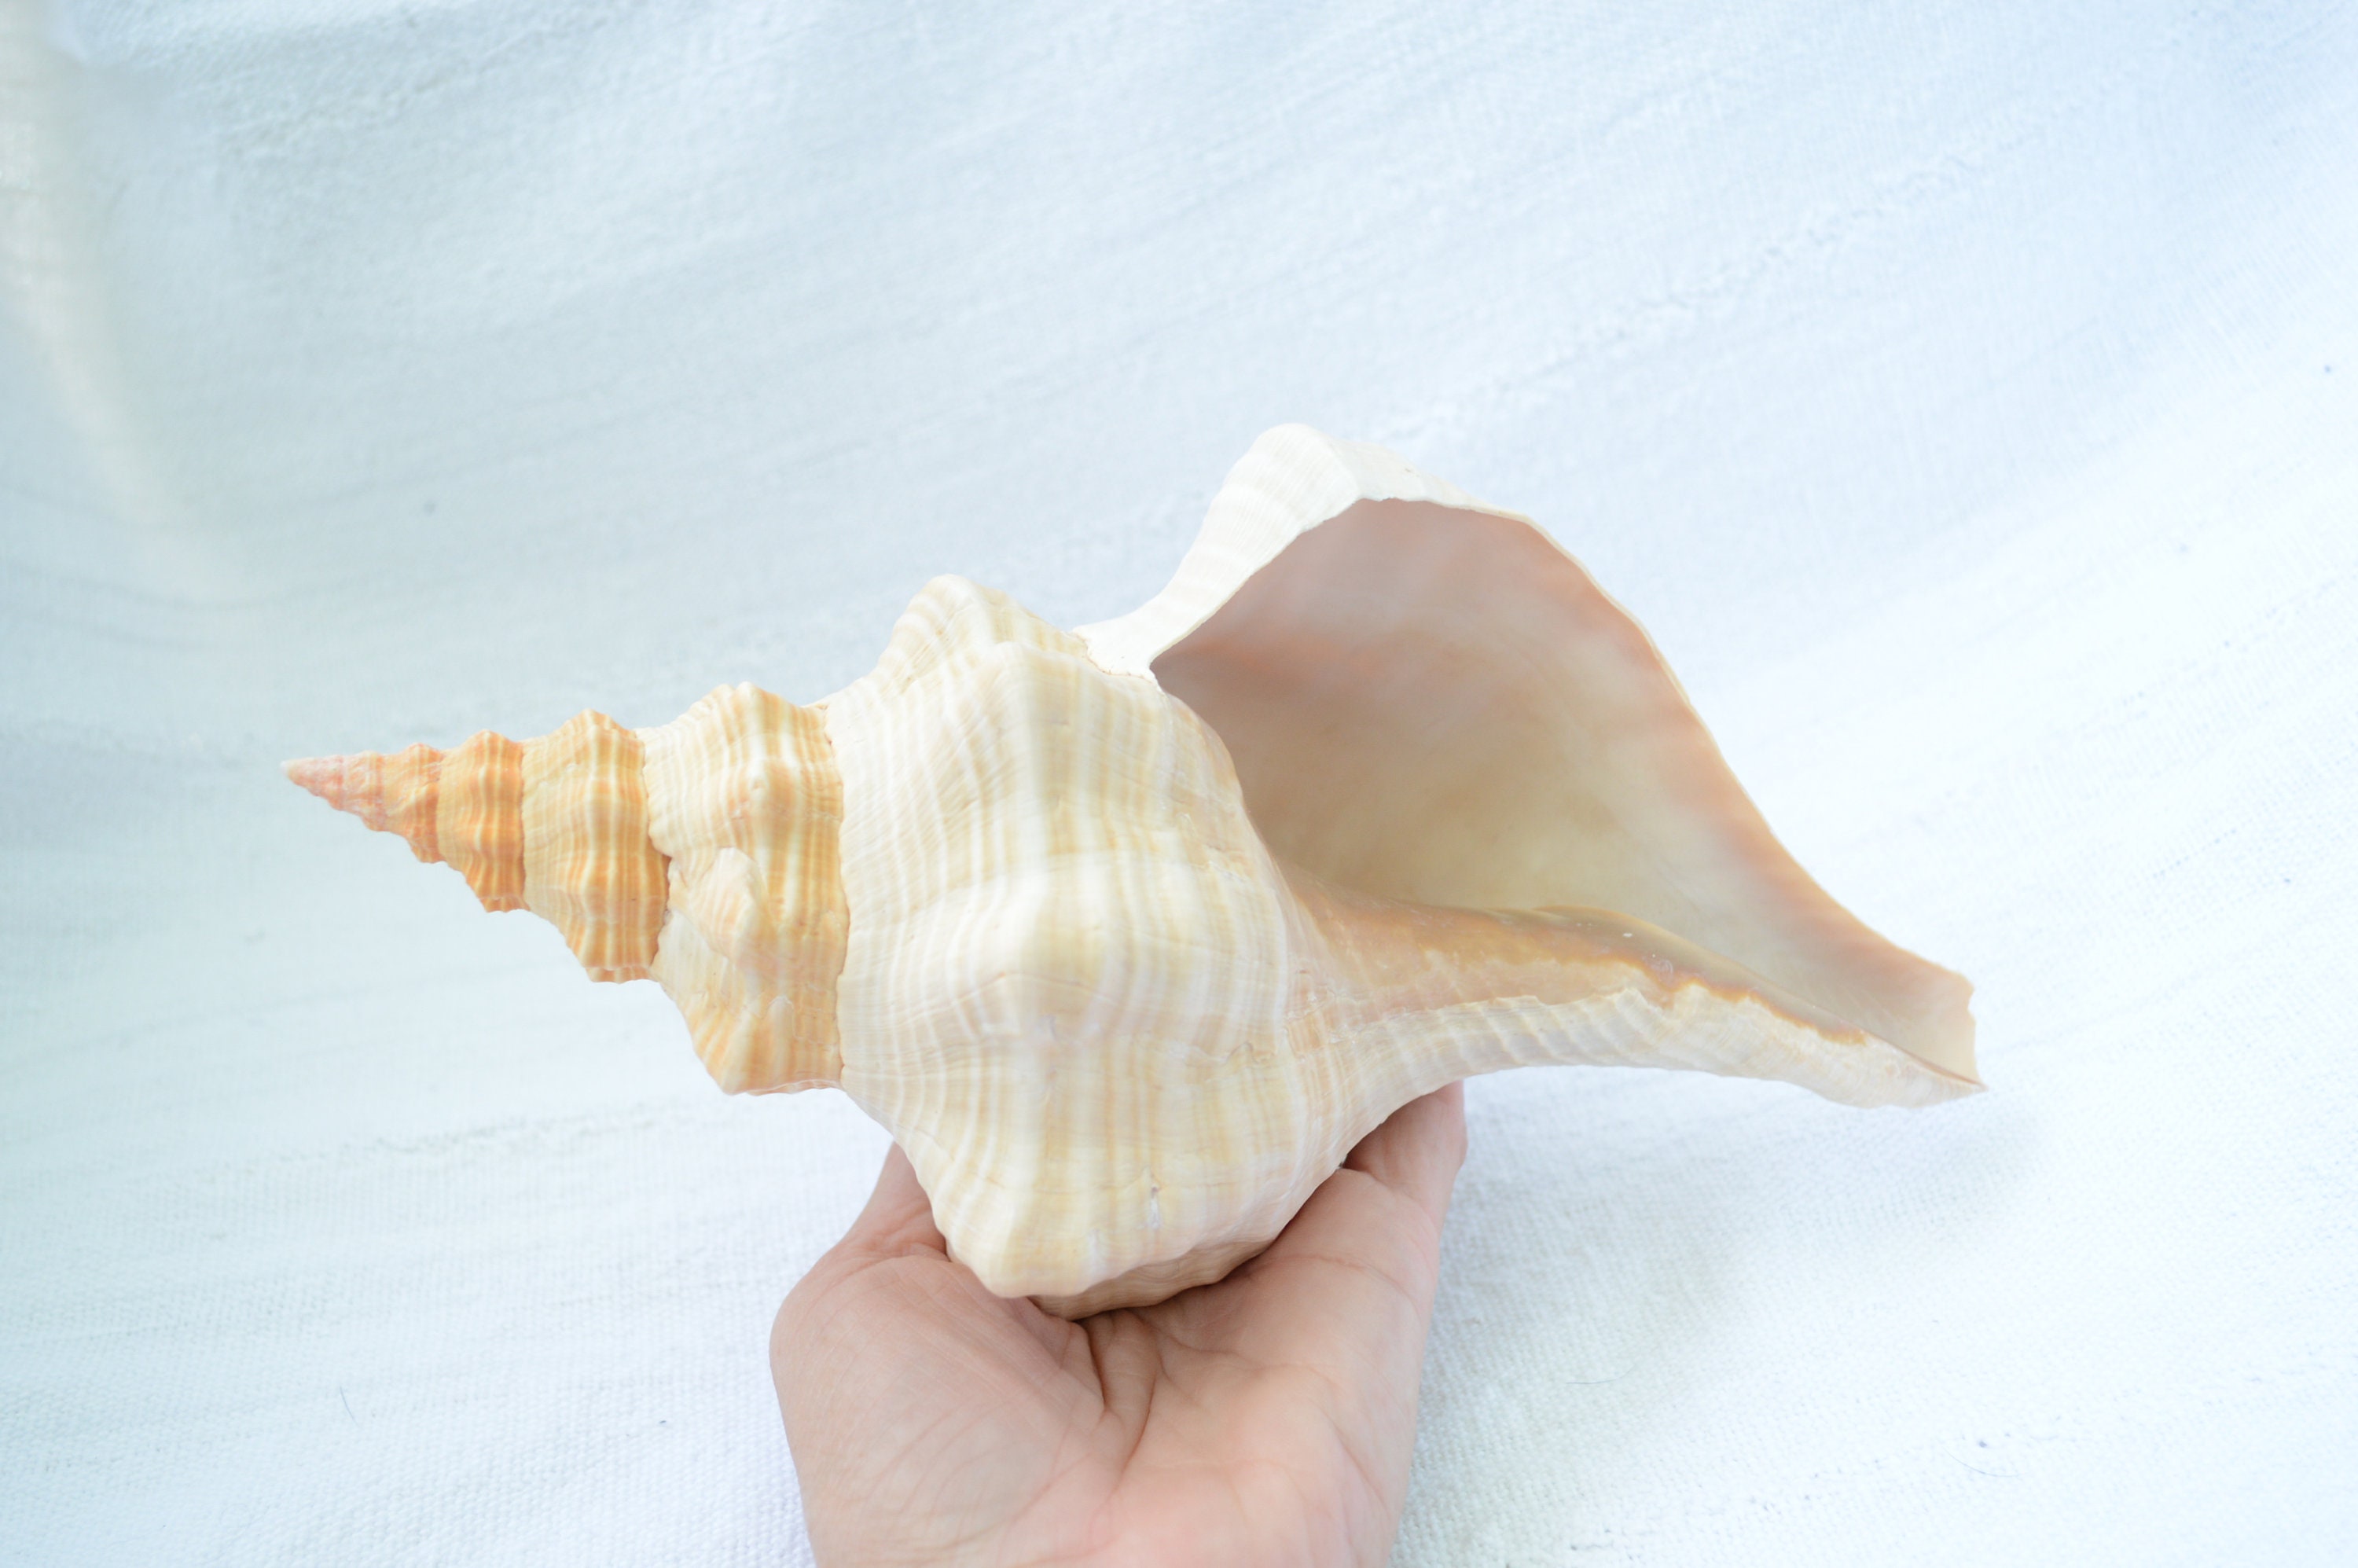 Large Natural Sea Shells, Huge Ocean Conch 7-8 Inches Jumbo Seashells  Perfect for Wedding Decor Beach Theme Party, Home Decorations,DIY Crafts,  Fish Tank and Shell Collectors 